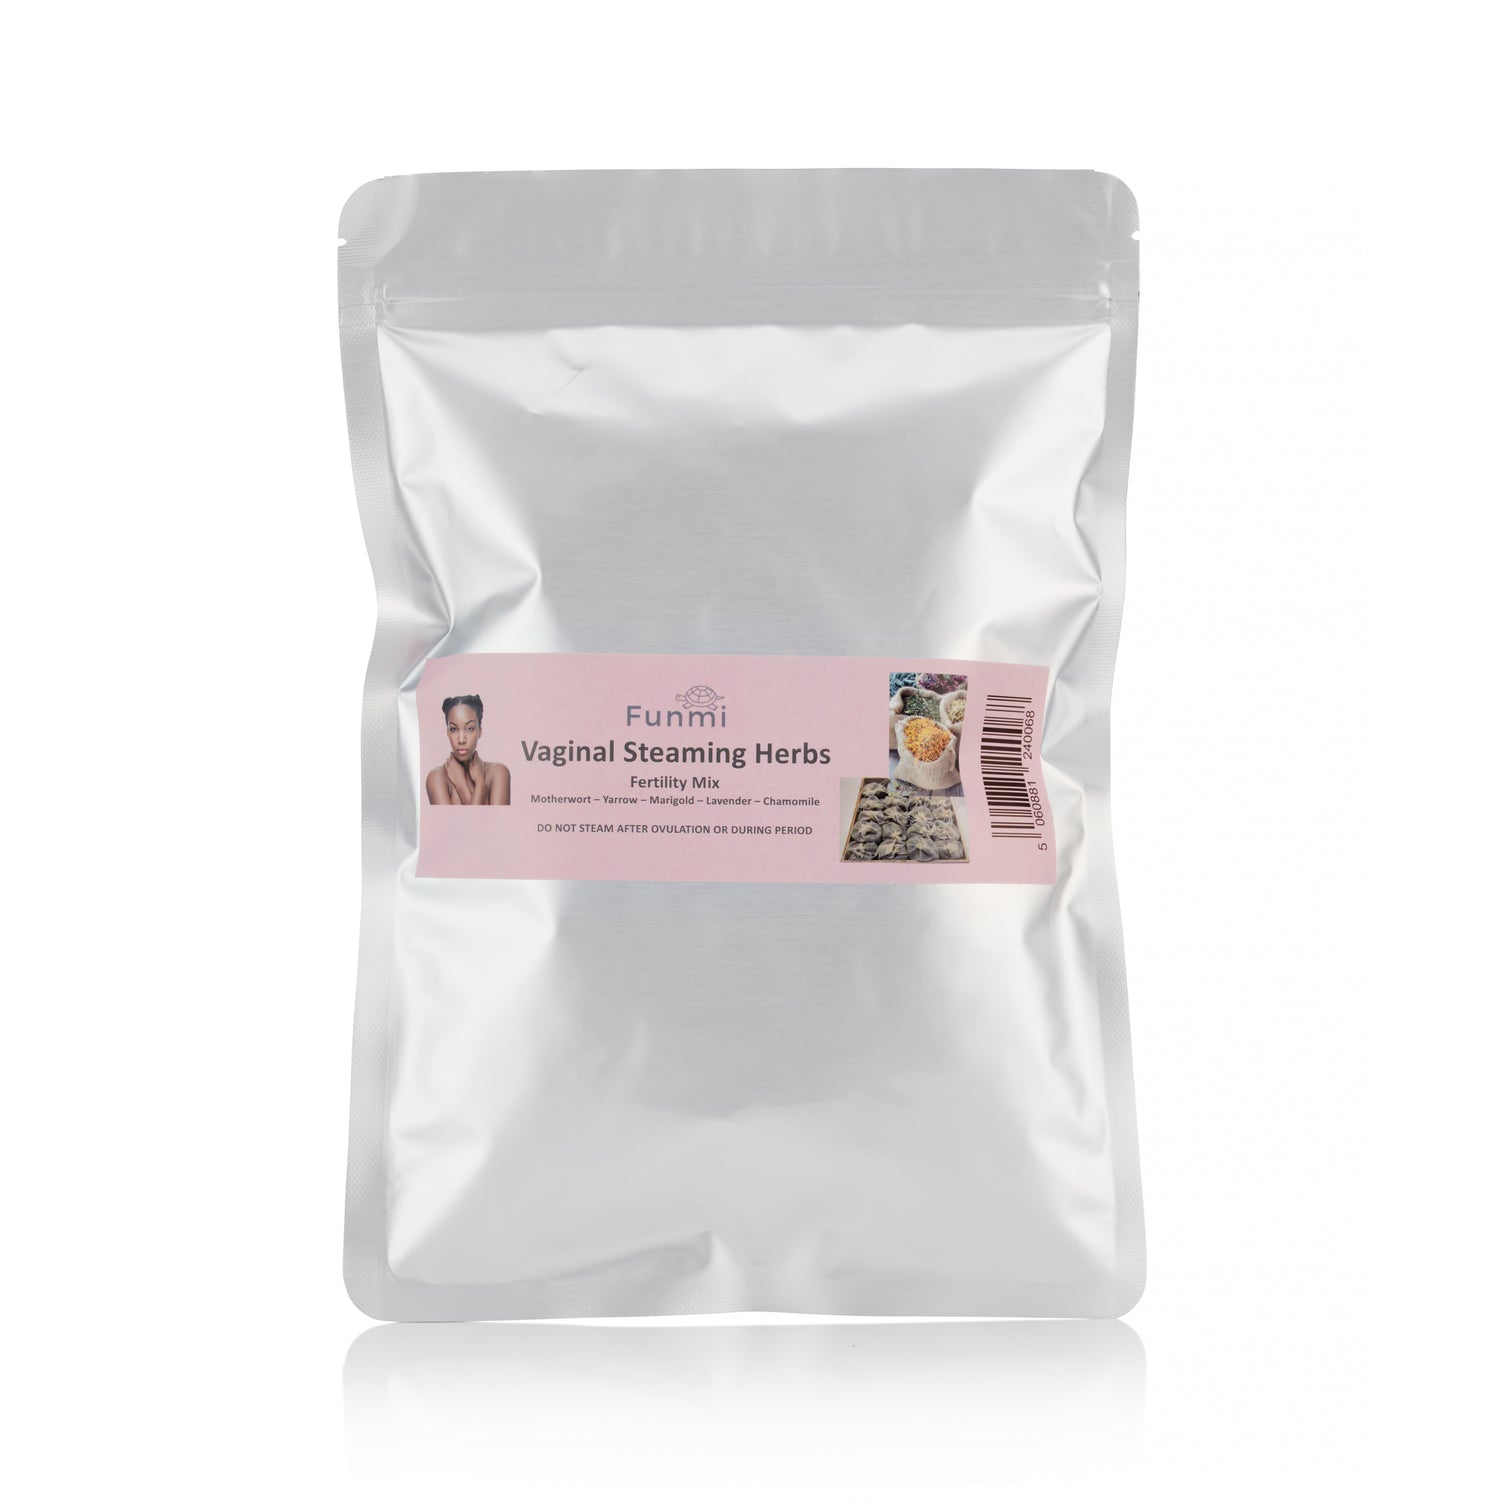 Funmi Vaginal Steaming Herbs Fertility Mix packaging